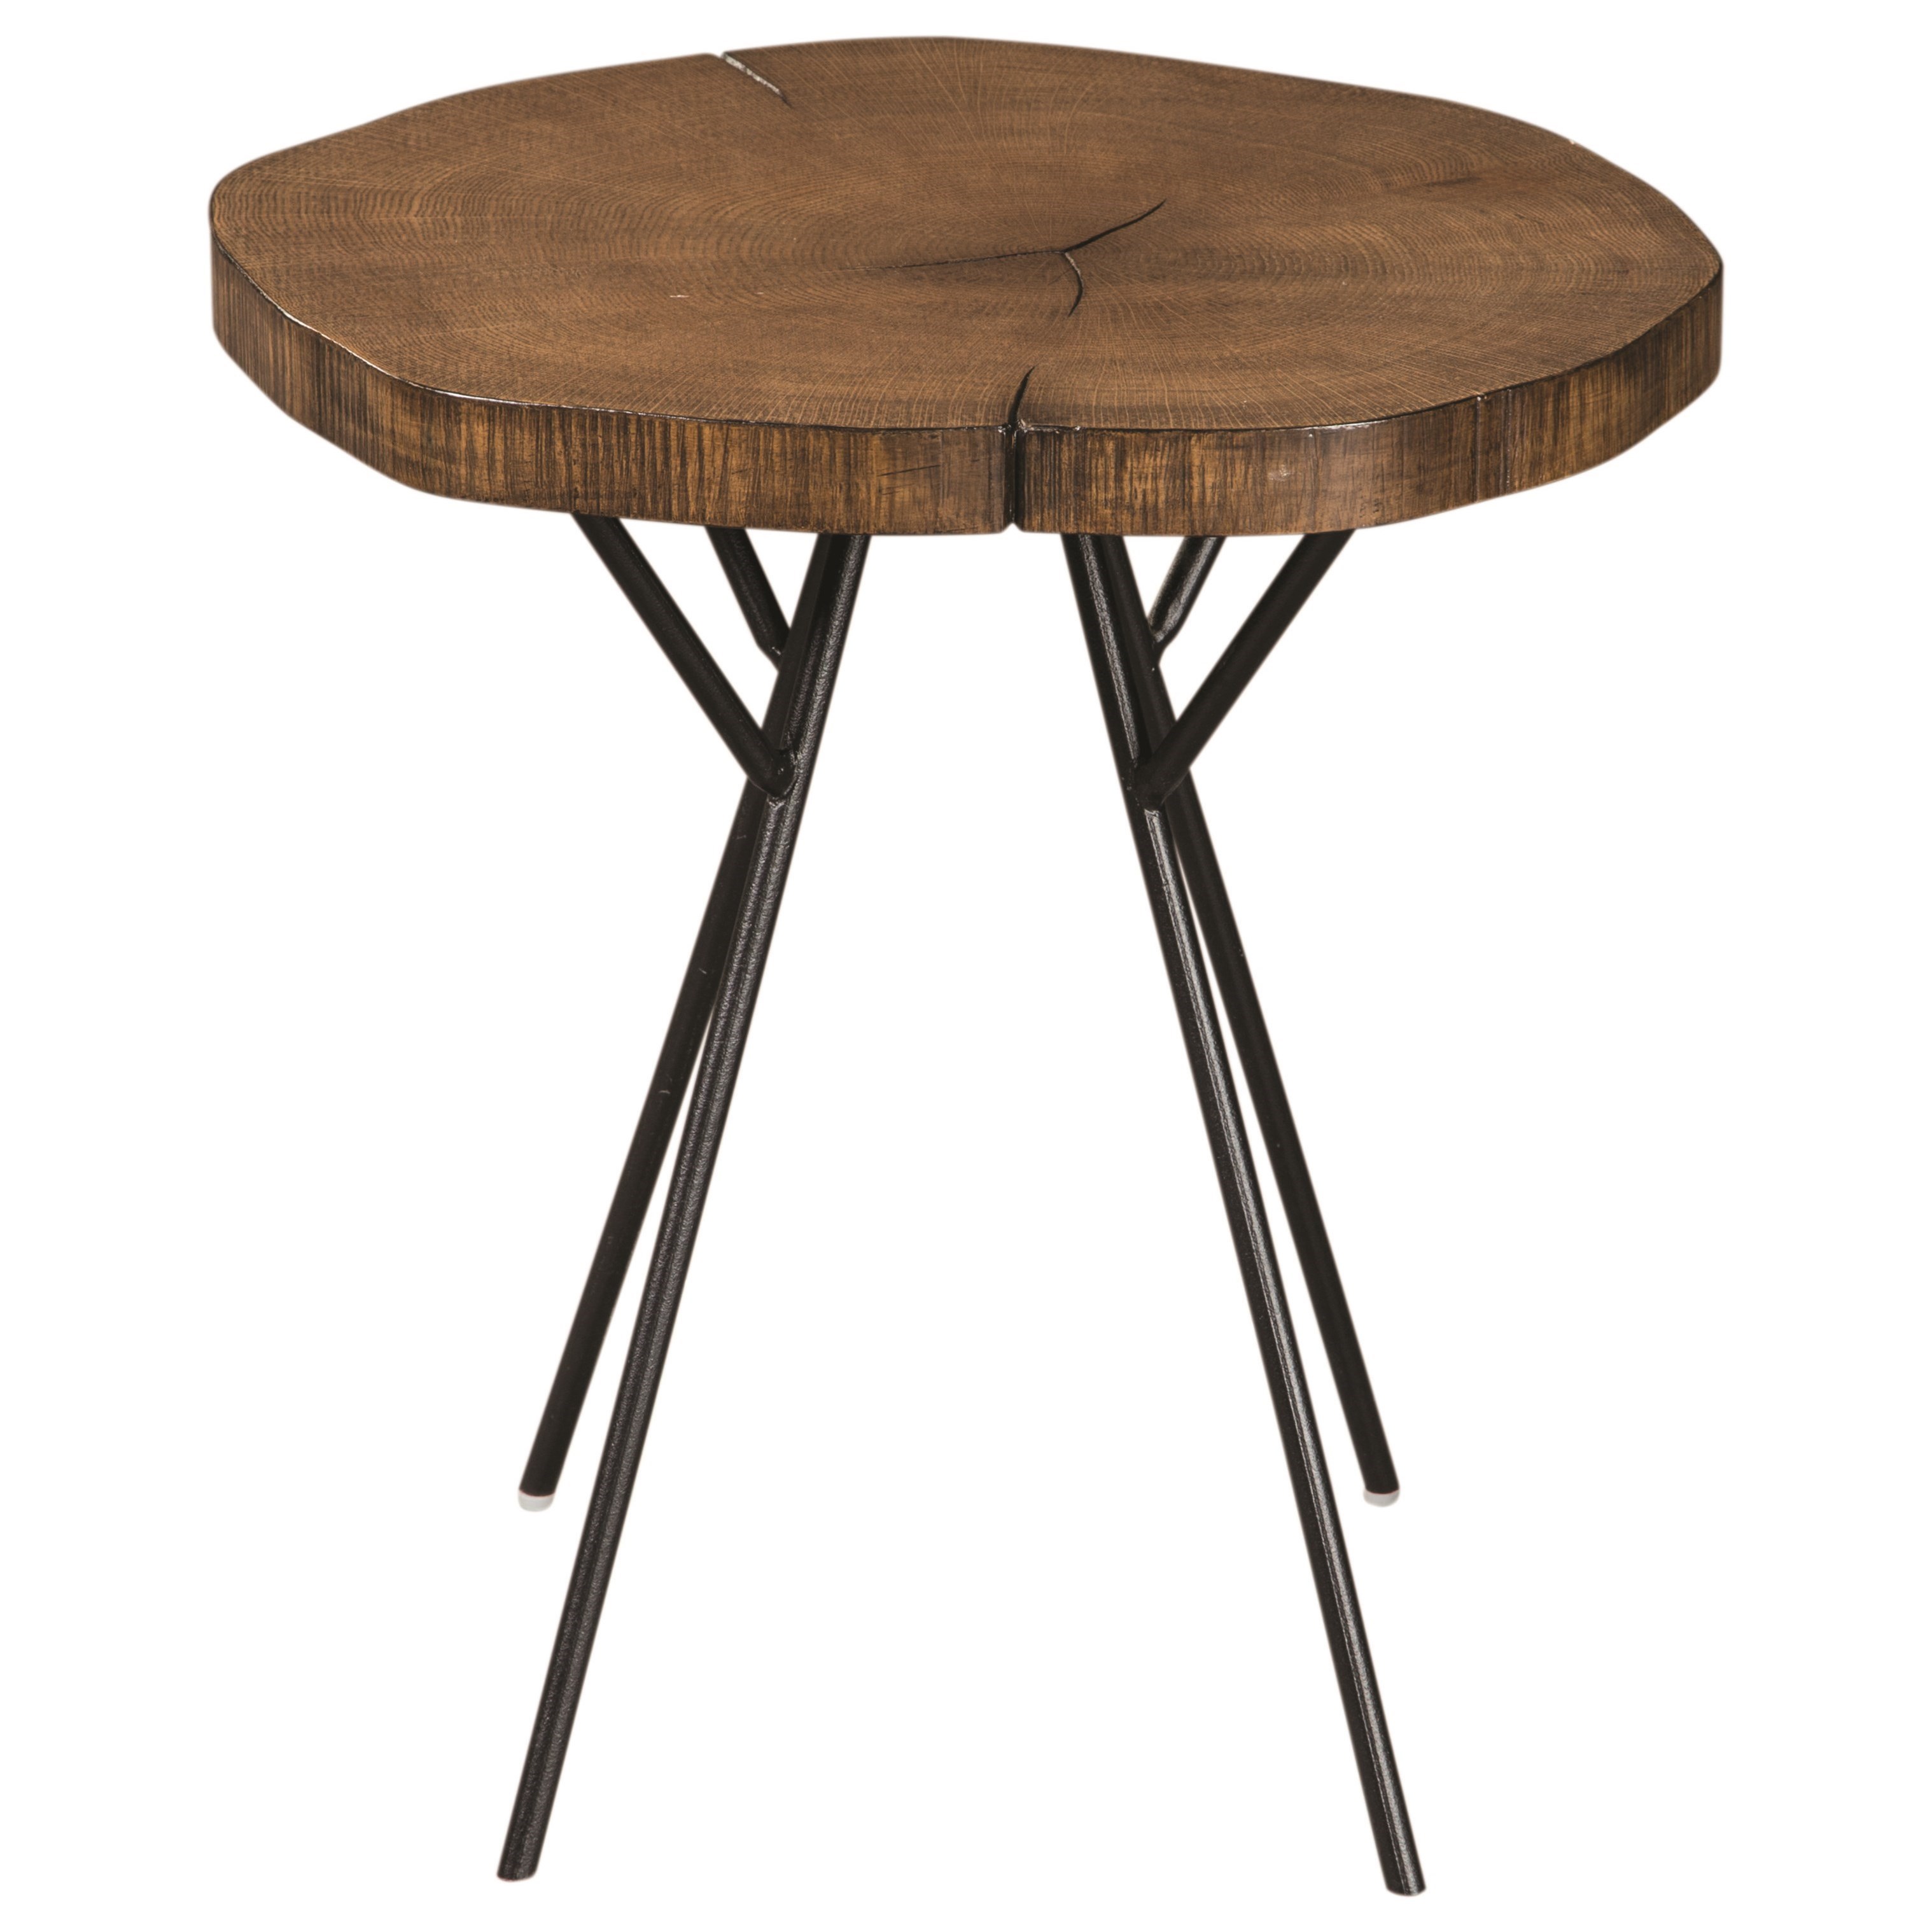 tree trunk slab accent table with metal legs scott living wolf products color wood and furniture leick computer desk square bar height dining round folding target coffee glass top